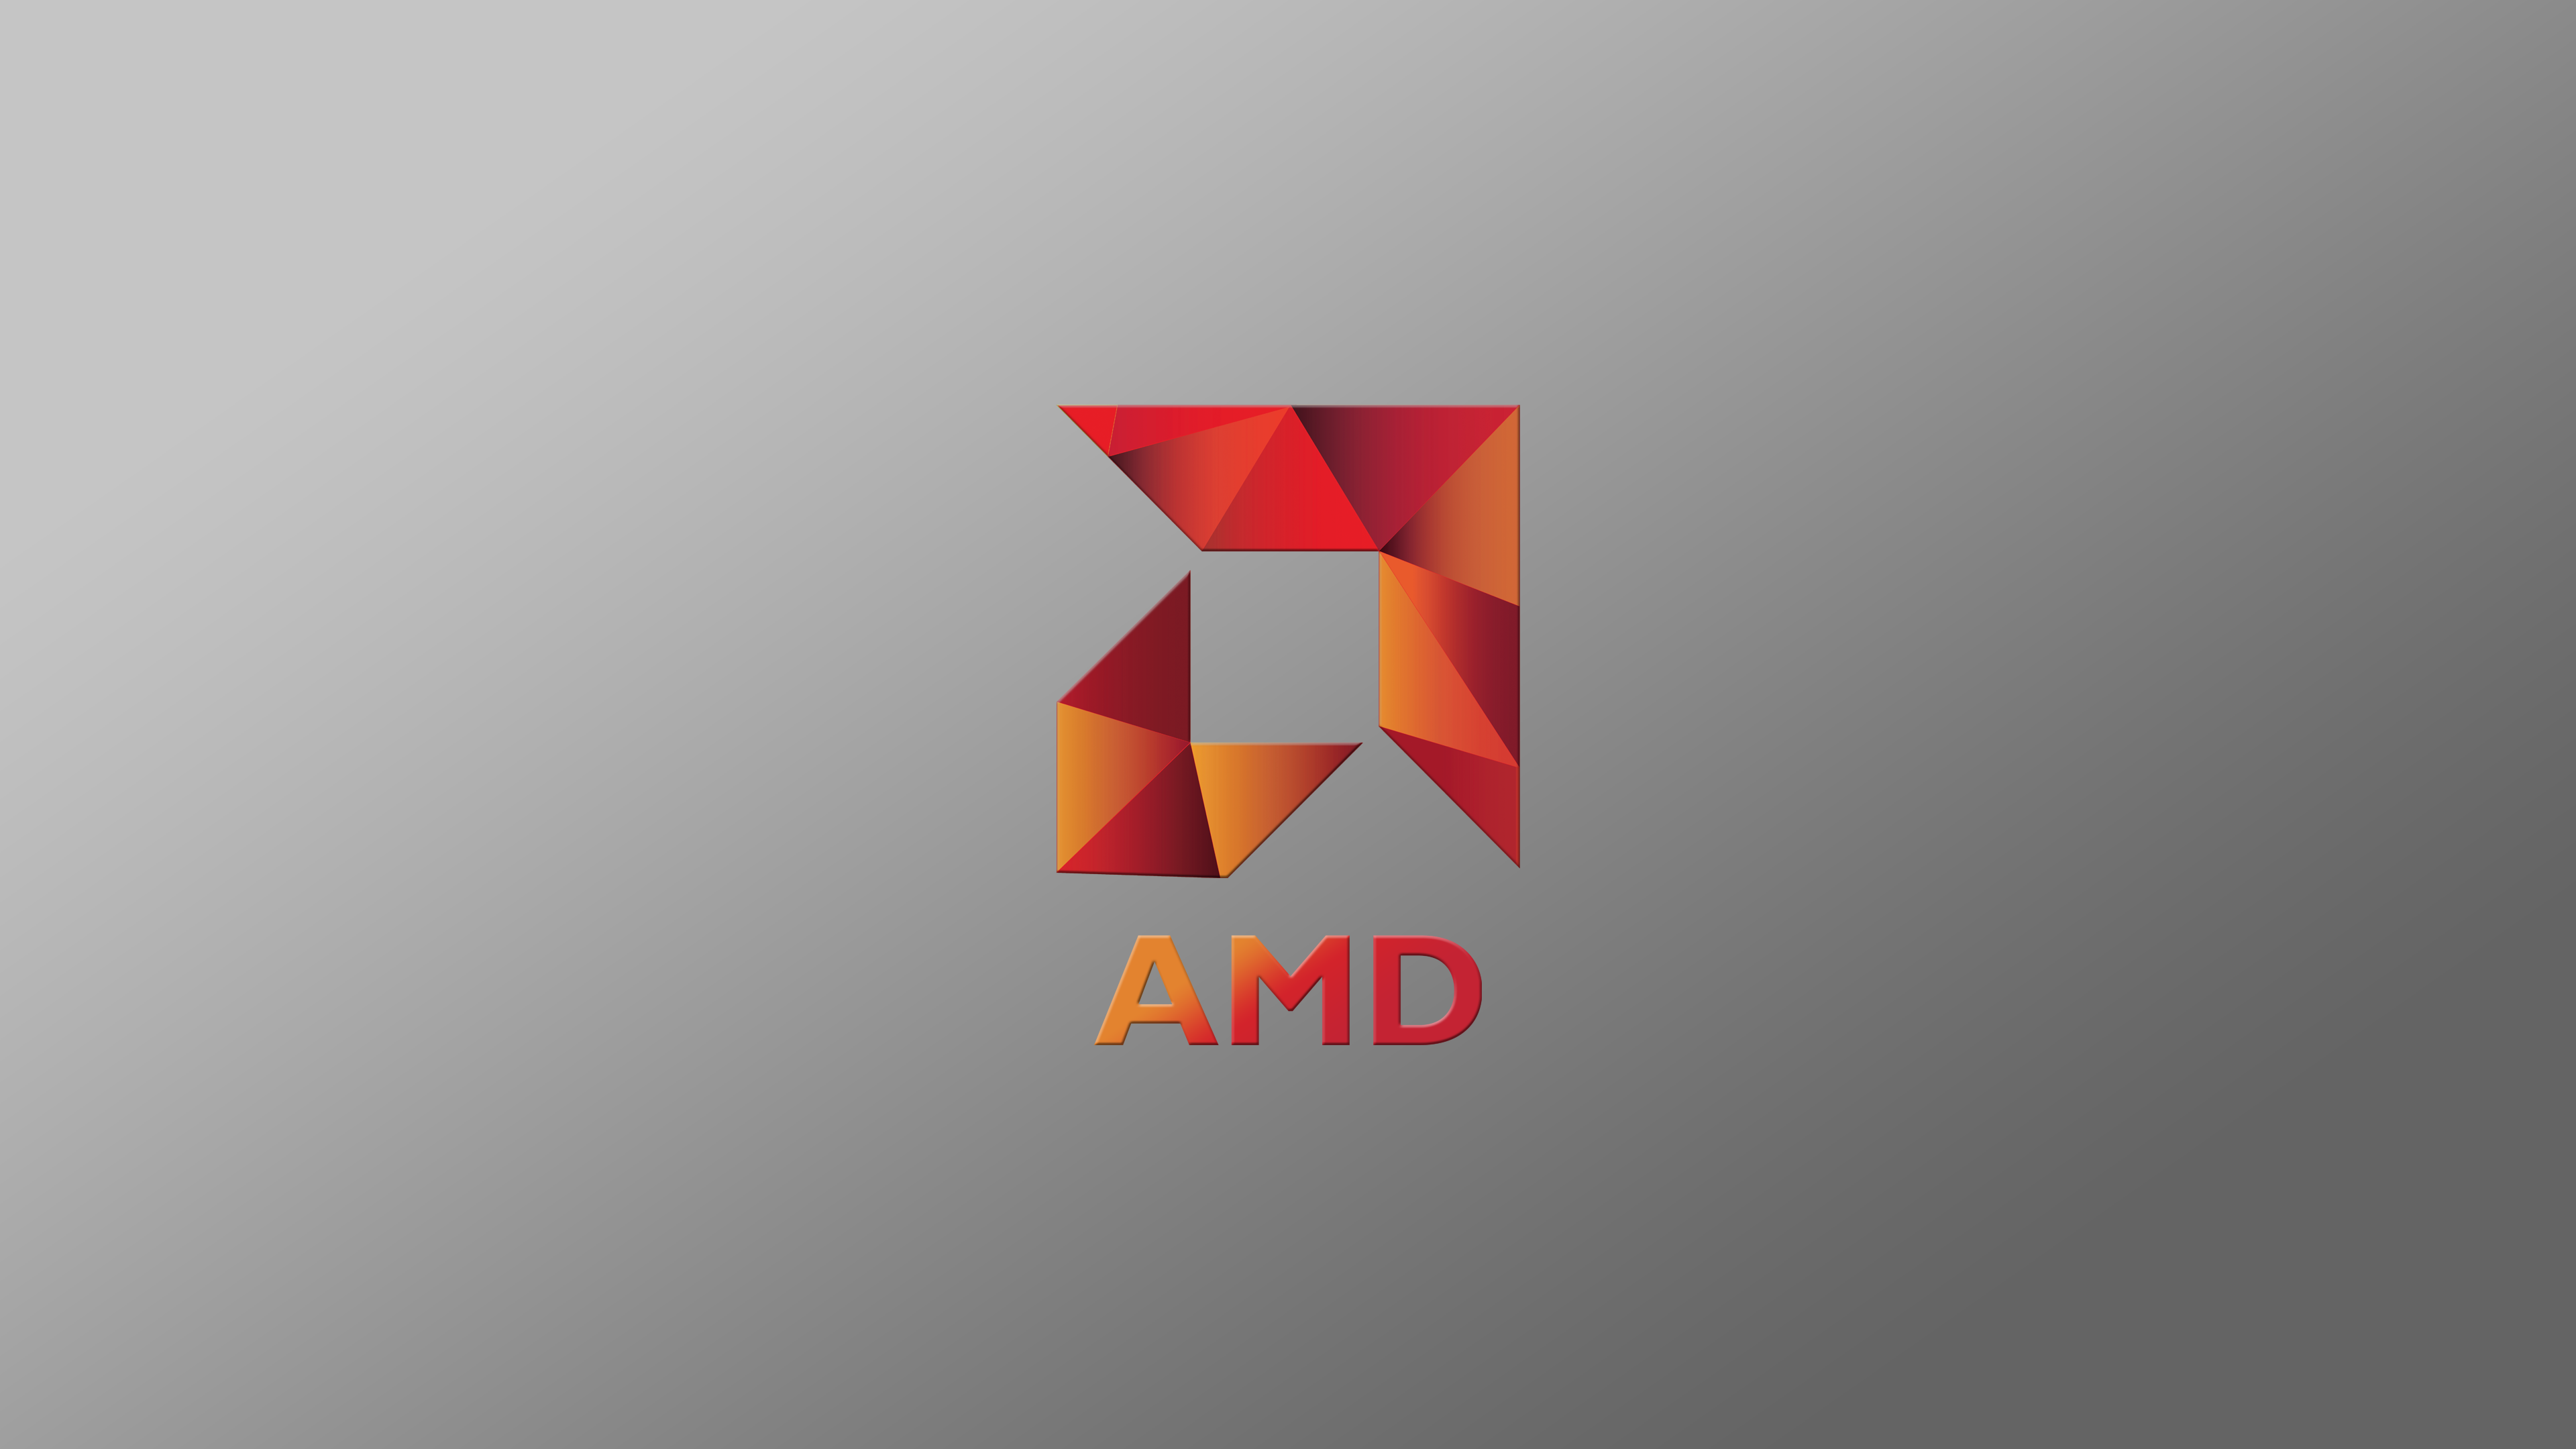 AMD 4K Wallpaper. Big Thanks To U Thom0075 For The Logo Posted Some Days Ago. Hope You Guys Like It!